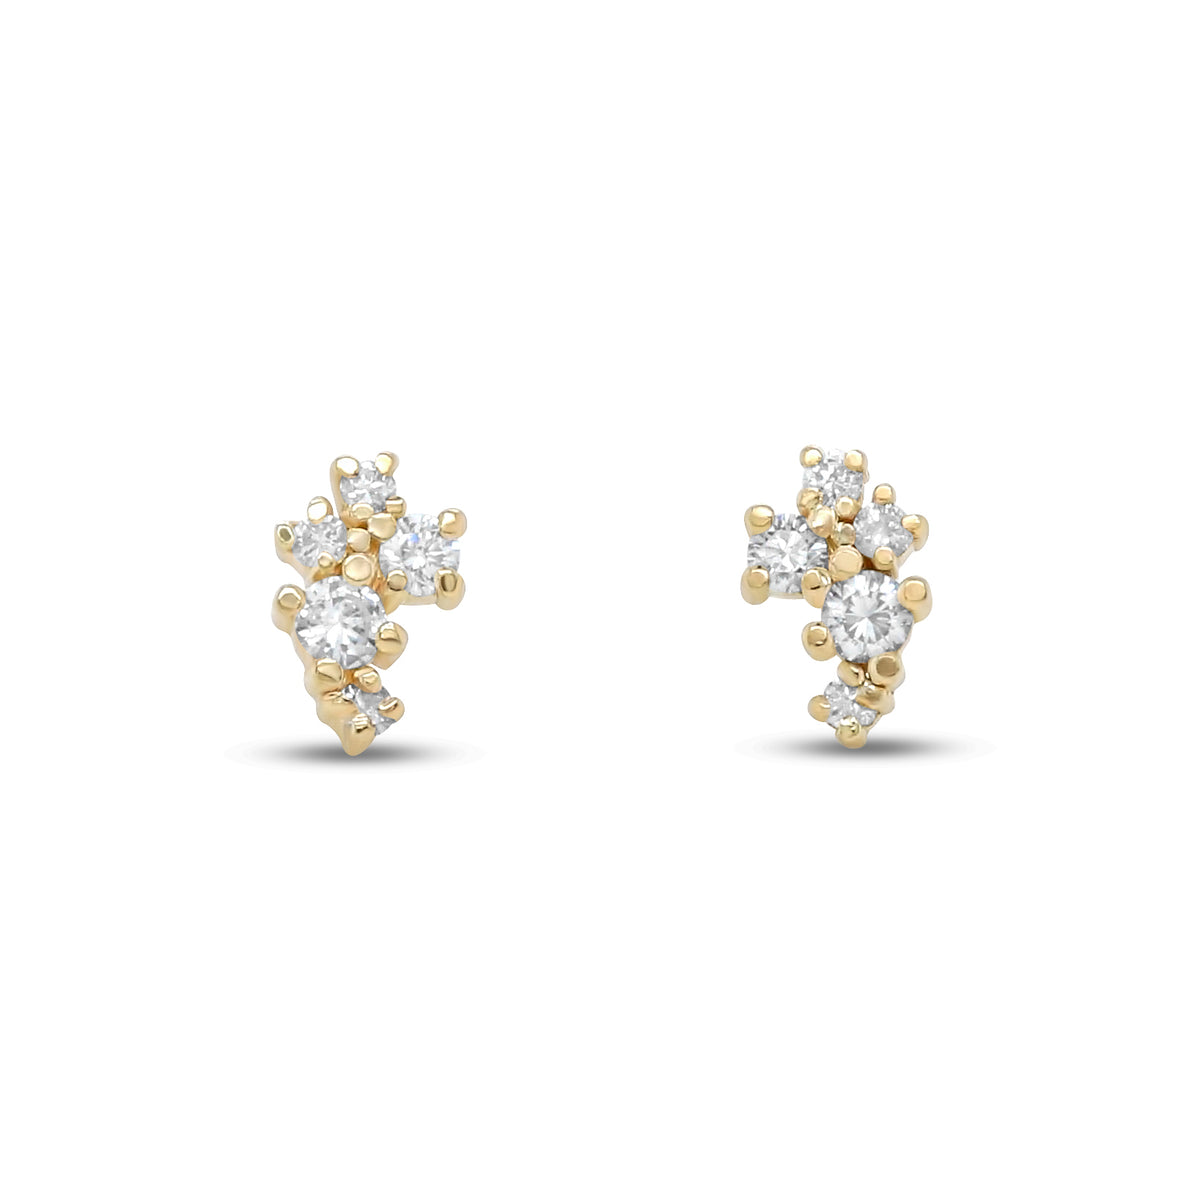 14k yellow gold stud earrings with round cut diamonds